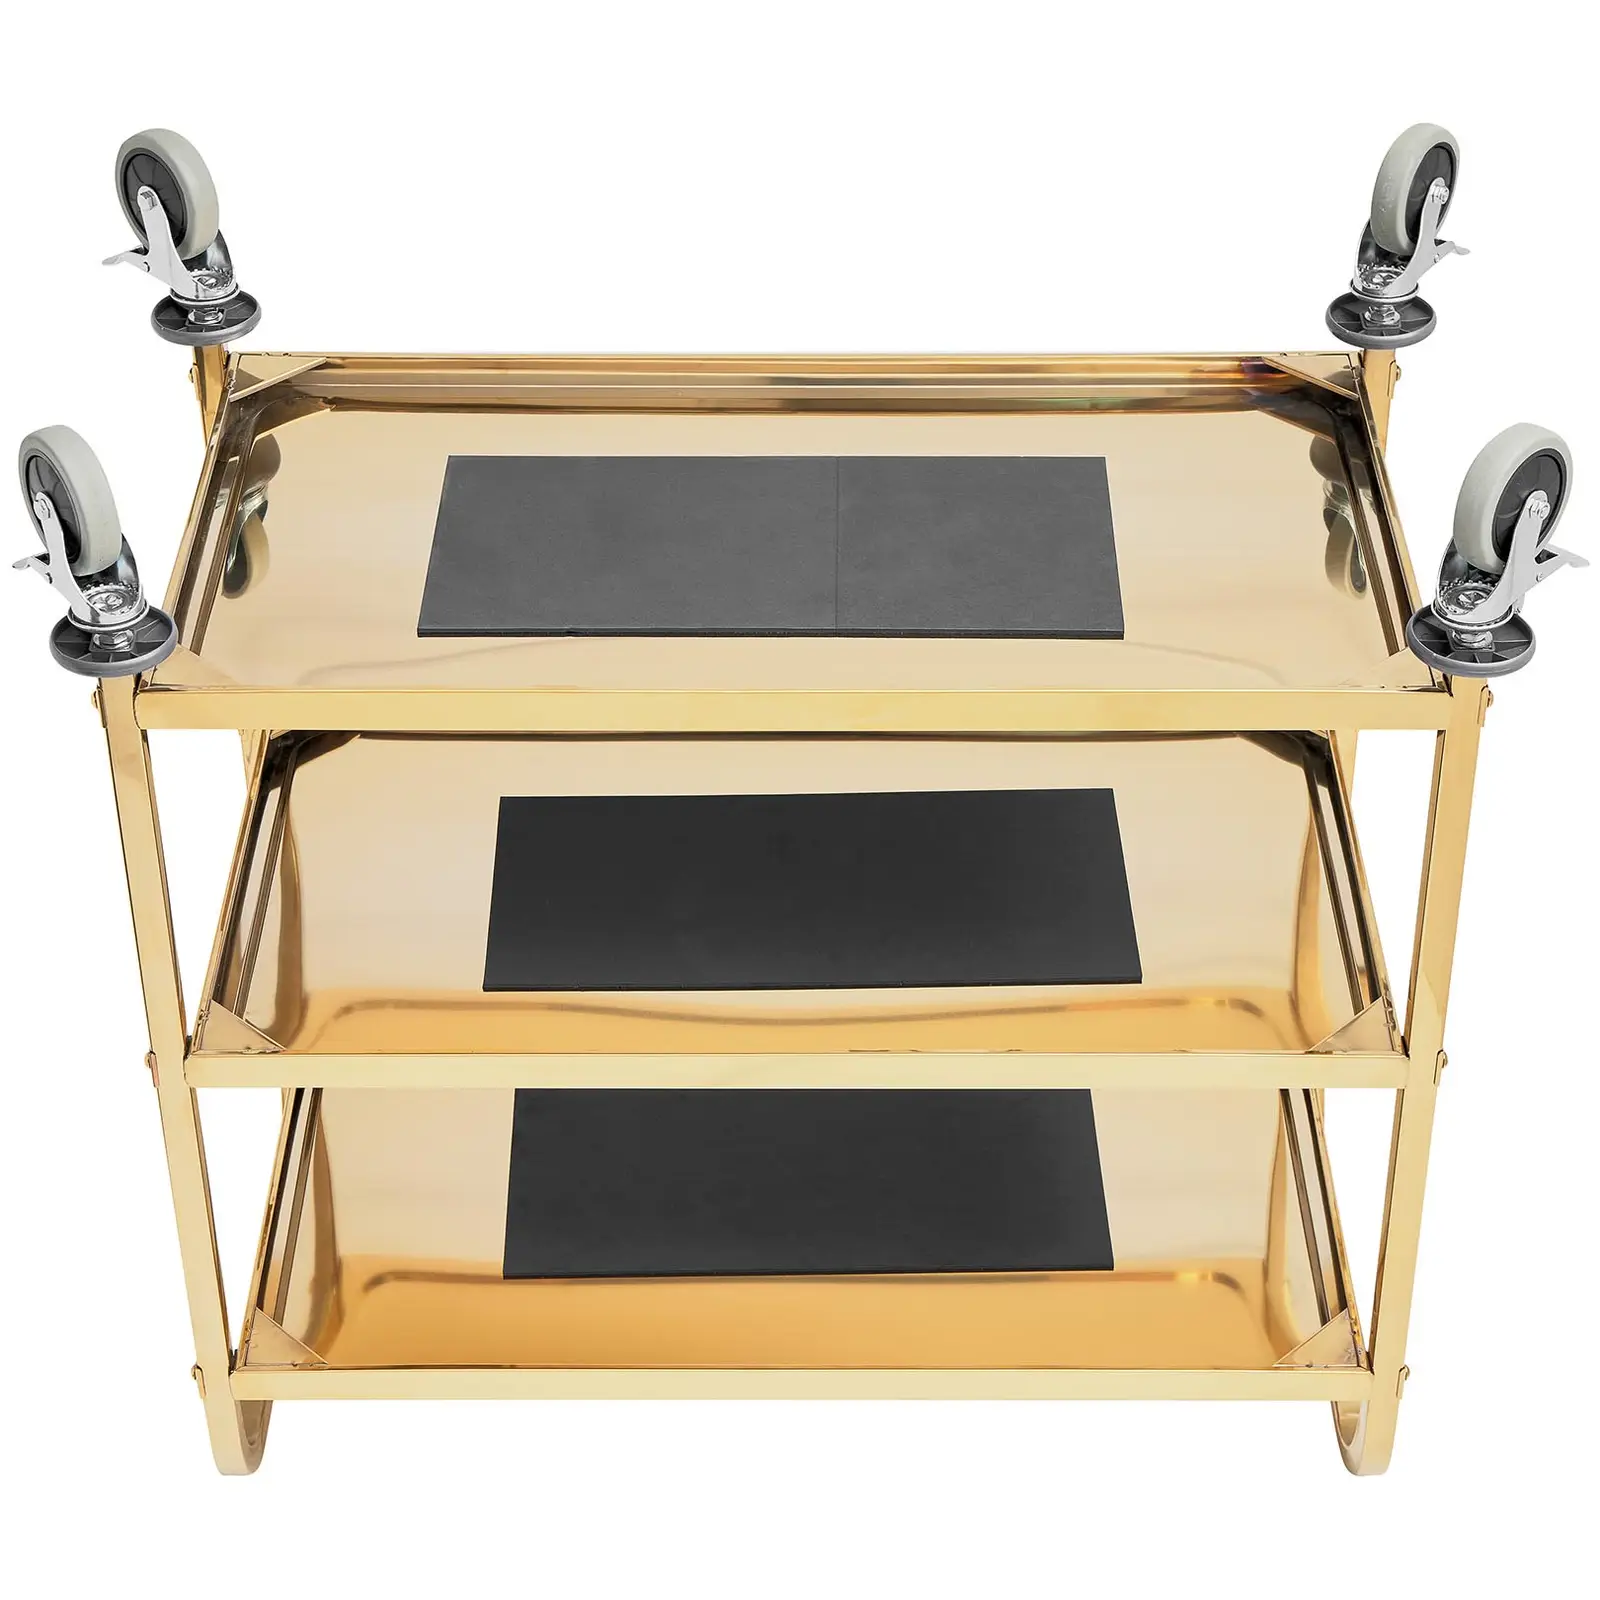 Service Trolley - 3 shelves - Royal Catering - up to 240 kg - shelves: 89.5 x 49.5 cm